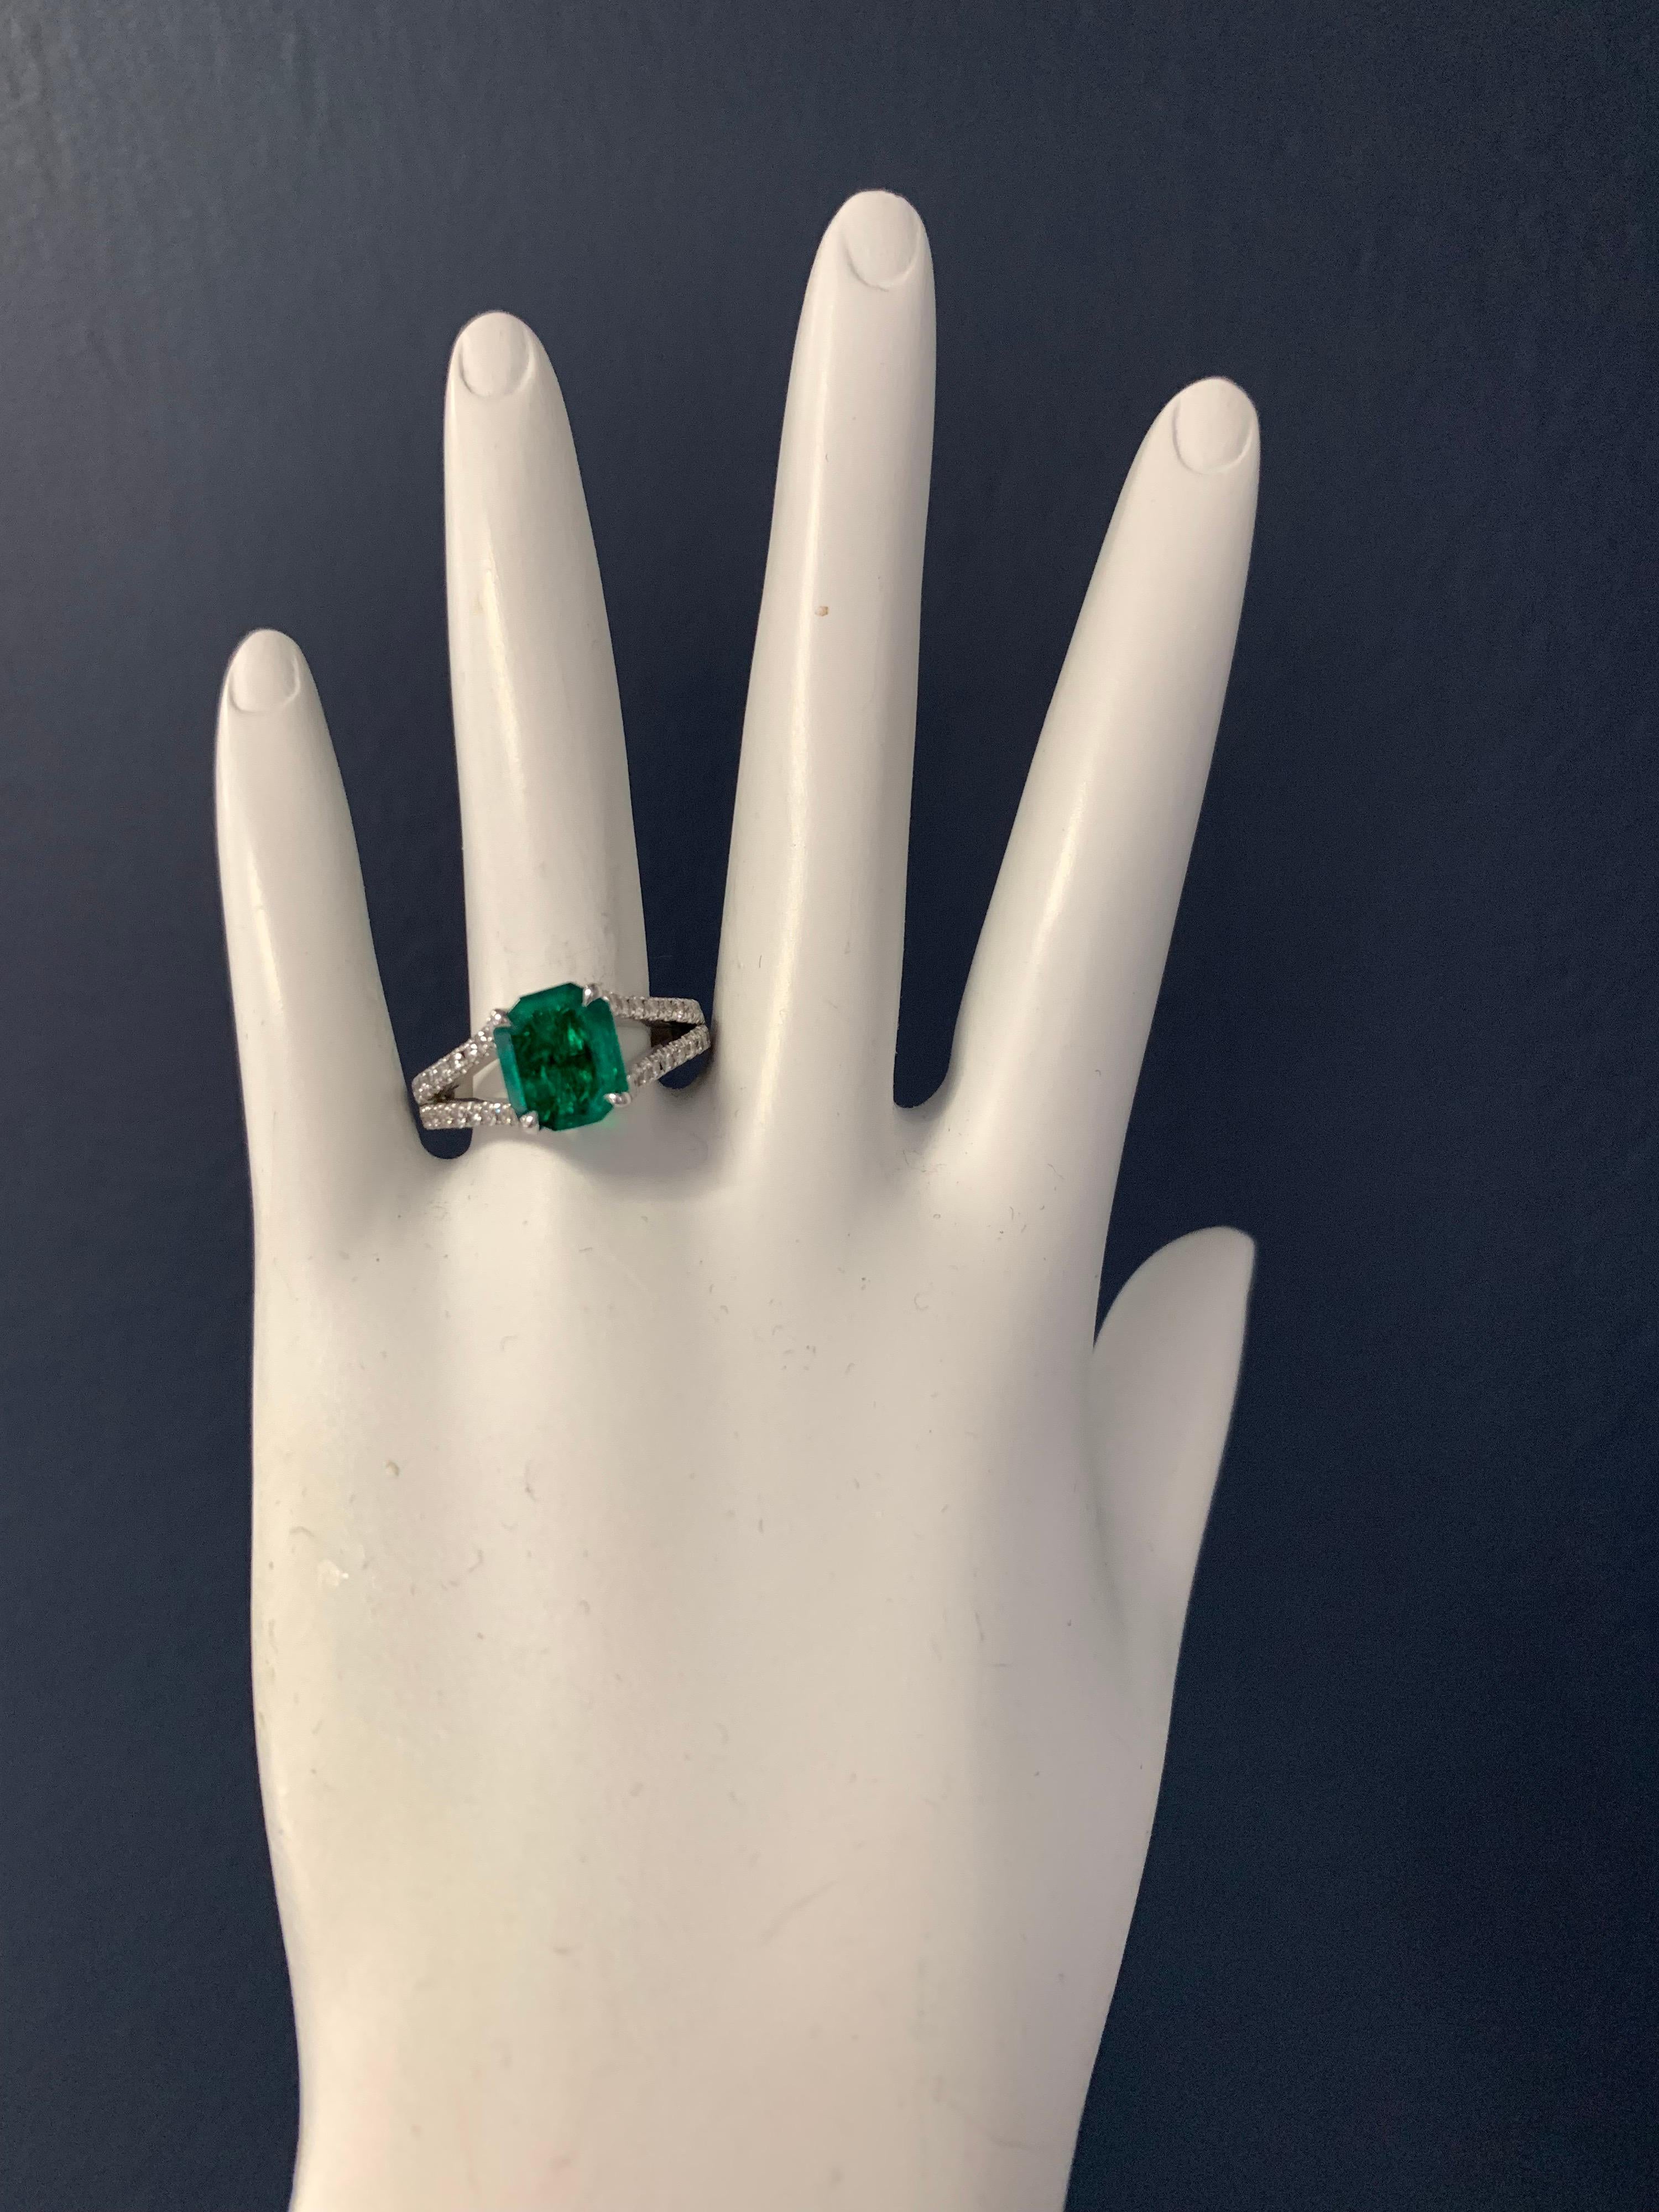 Stunning 18K White Gold Natural Emerald and Diamond Ring  (Size 7).

The centerstone is a 1.70 carat Natural Emerald measuring 9.22x7.68x3.11mm. The mounting consists of 40 Natural Round Brilliant Diamonds G in color and VS in clarity weighing 0.50